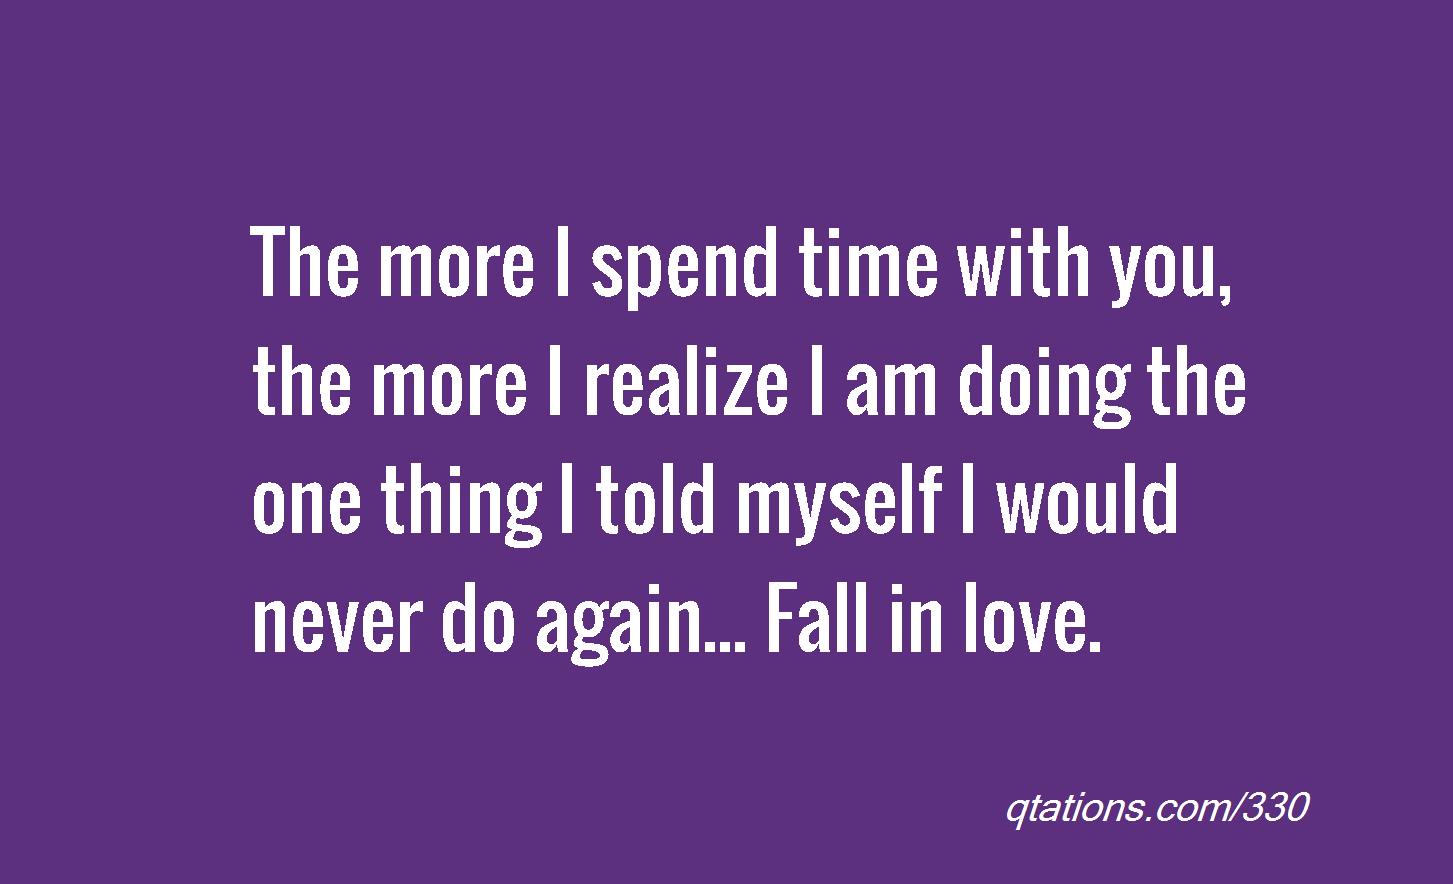 Quotes About Spending Time With The One You Love. QuotesGram